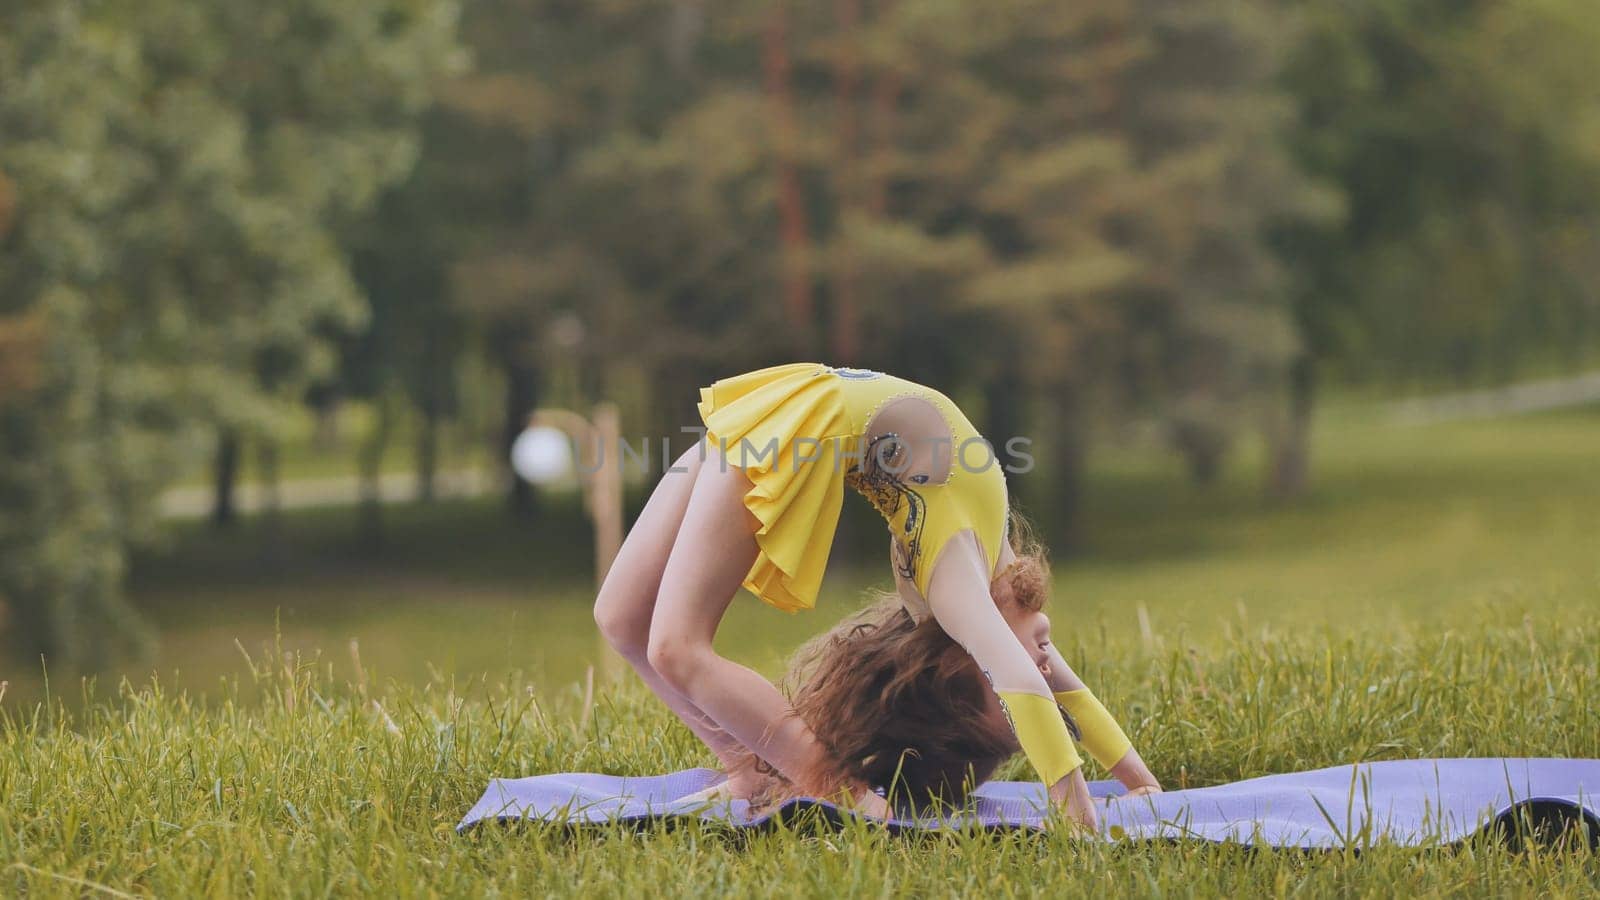 A little girl performs the elements of rhythmic gymnastics in the park